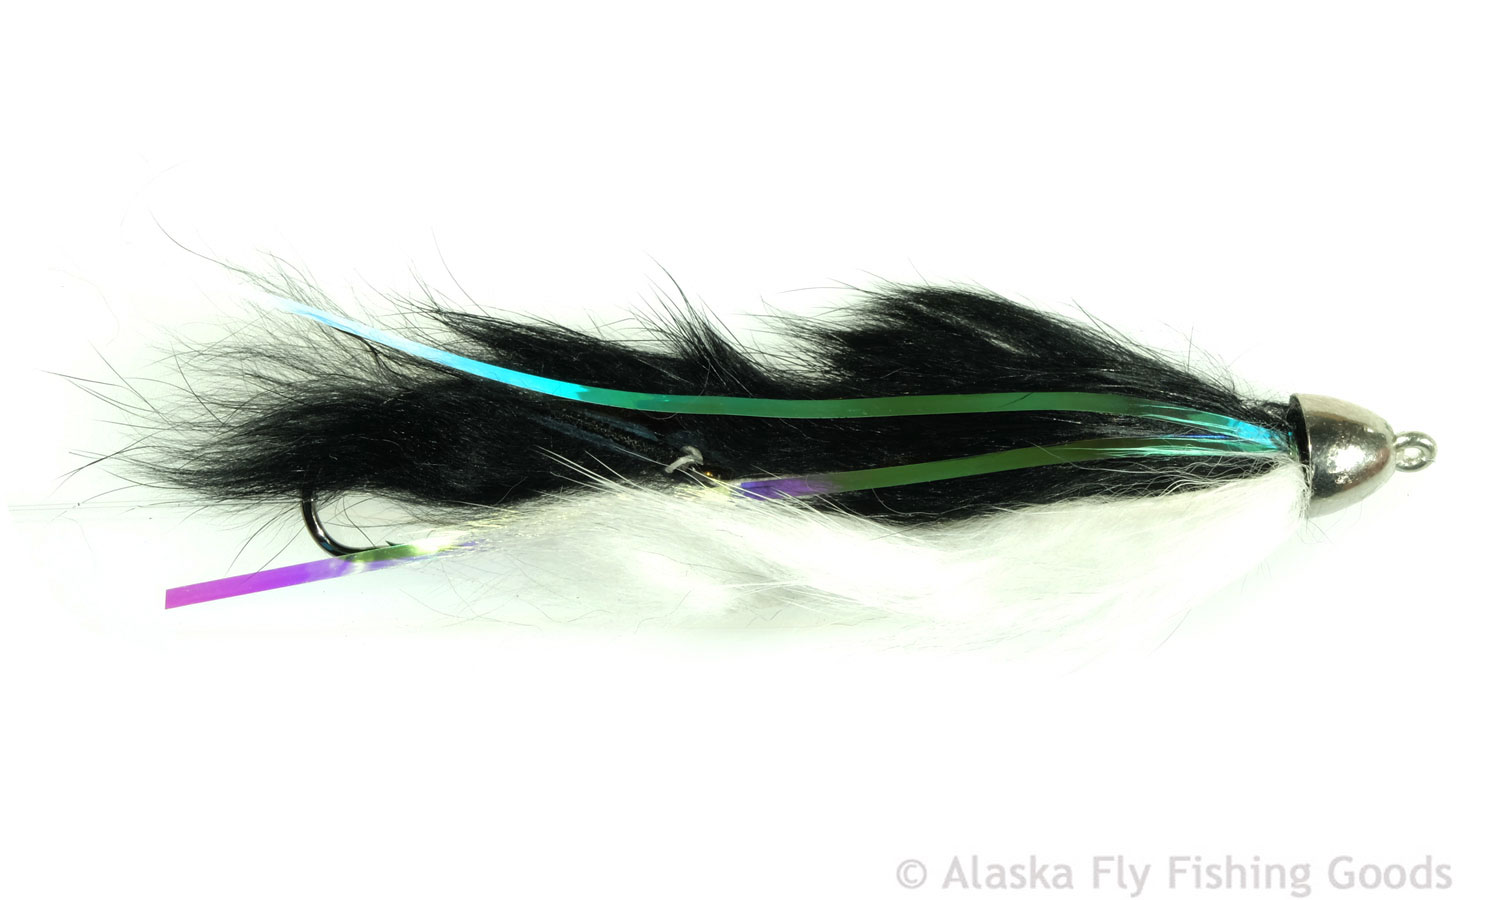 Feathers and Hackle - Fly Tying - Alaska Fly Fishing Goods